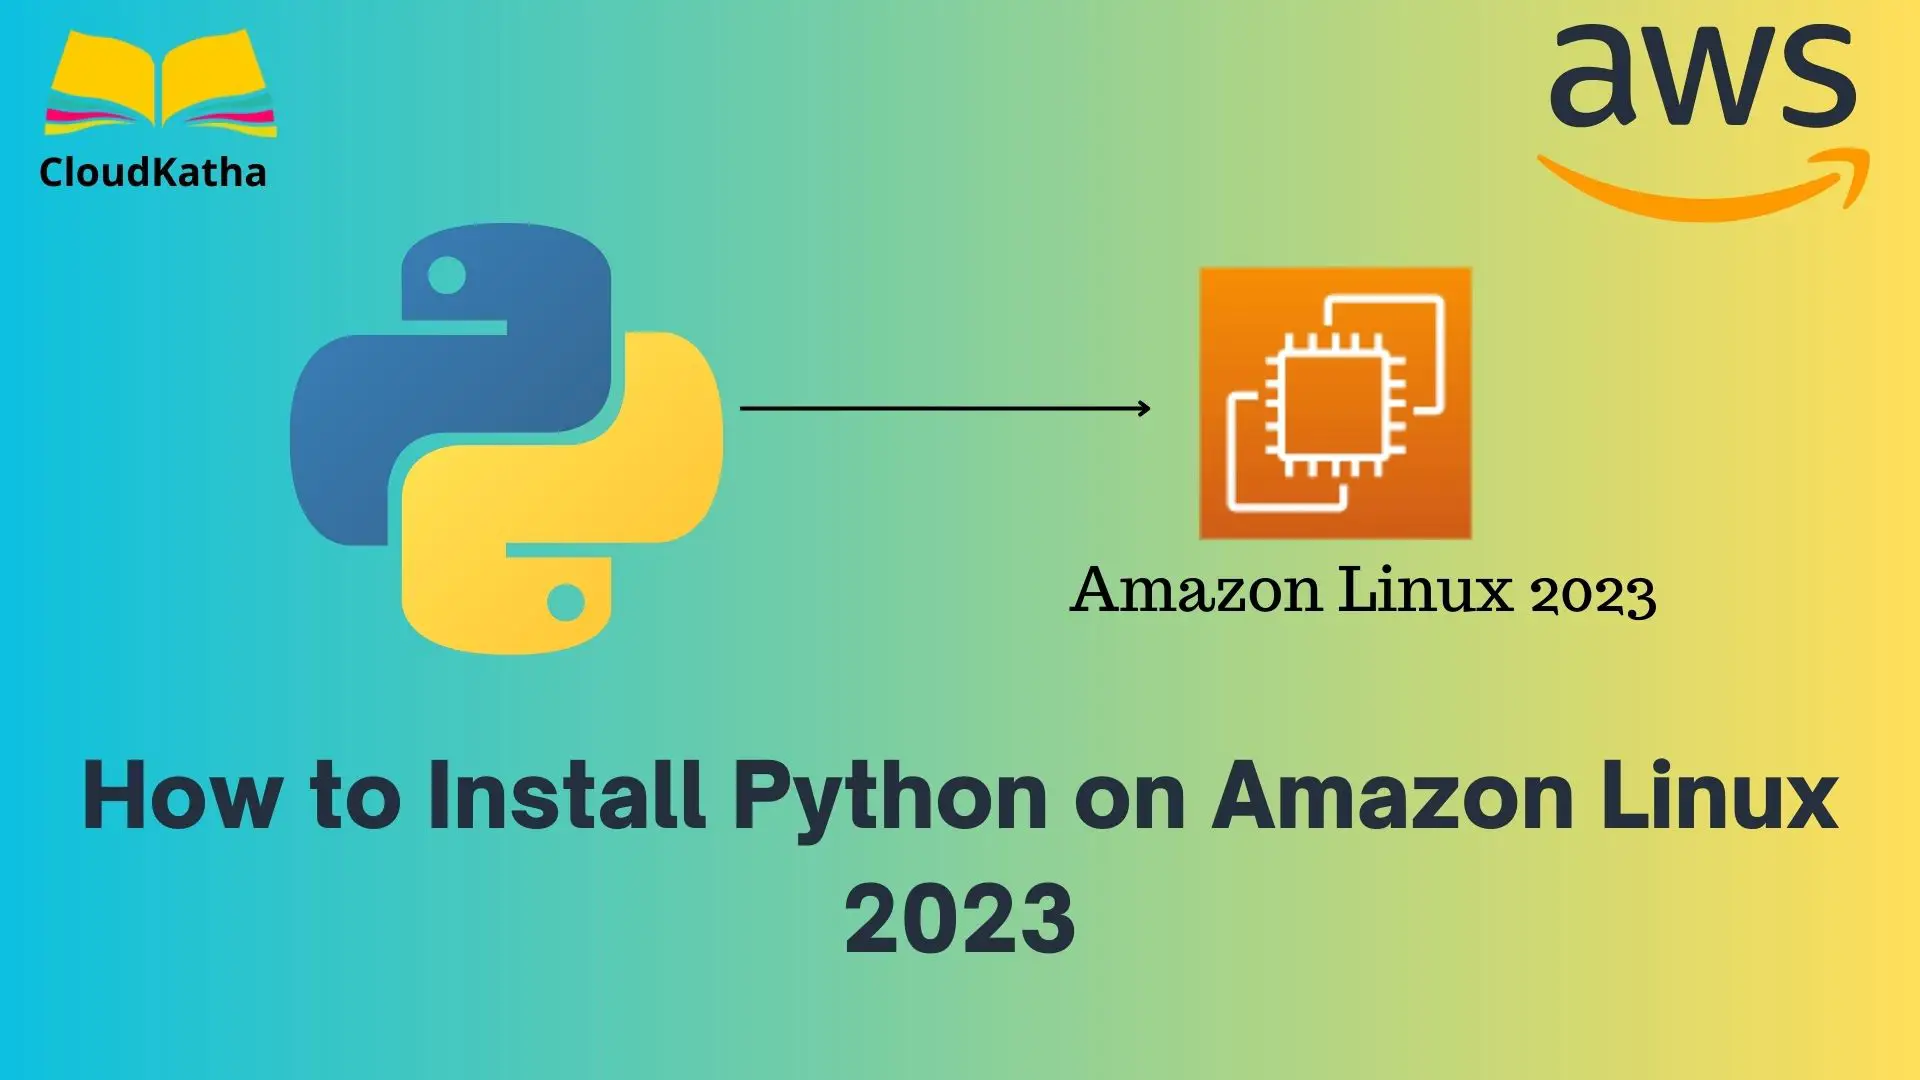 How to Install Python on Amazon Linux 2023